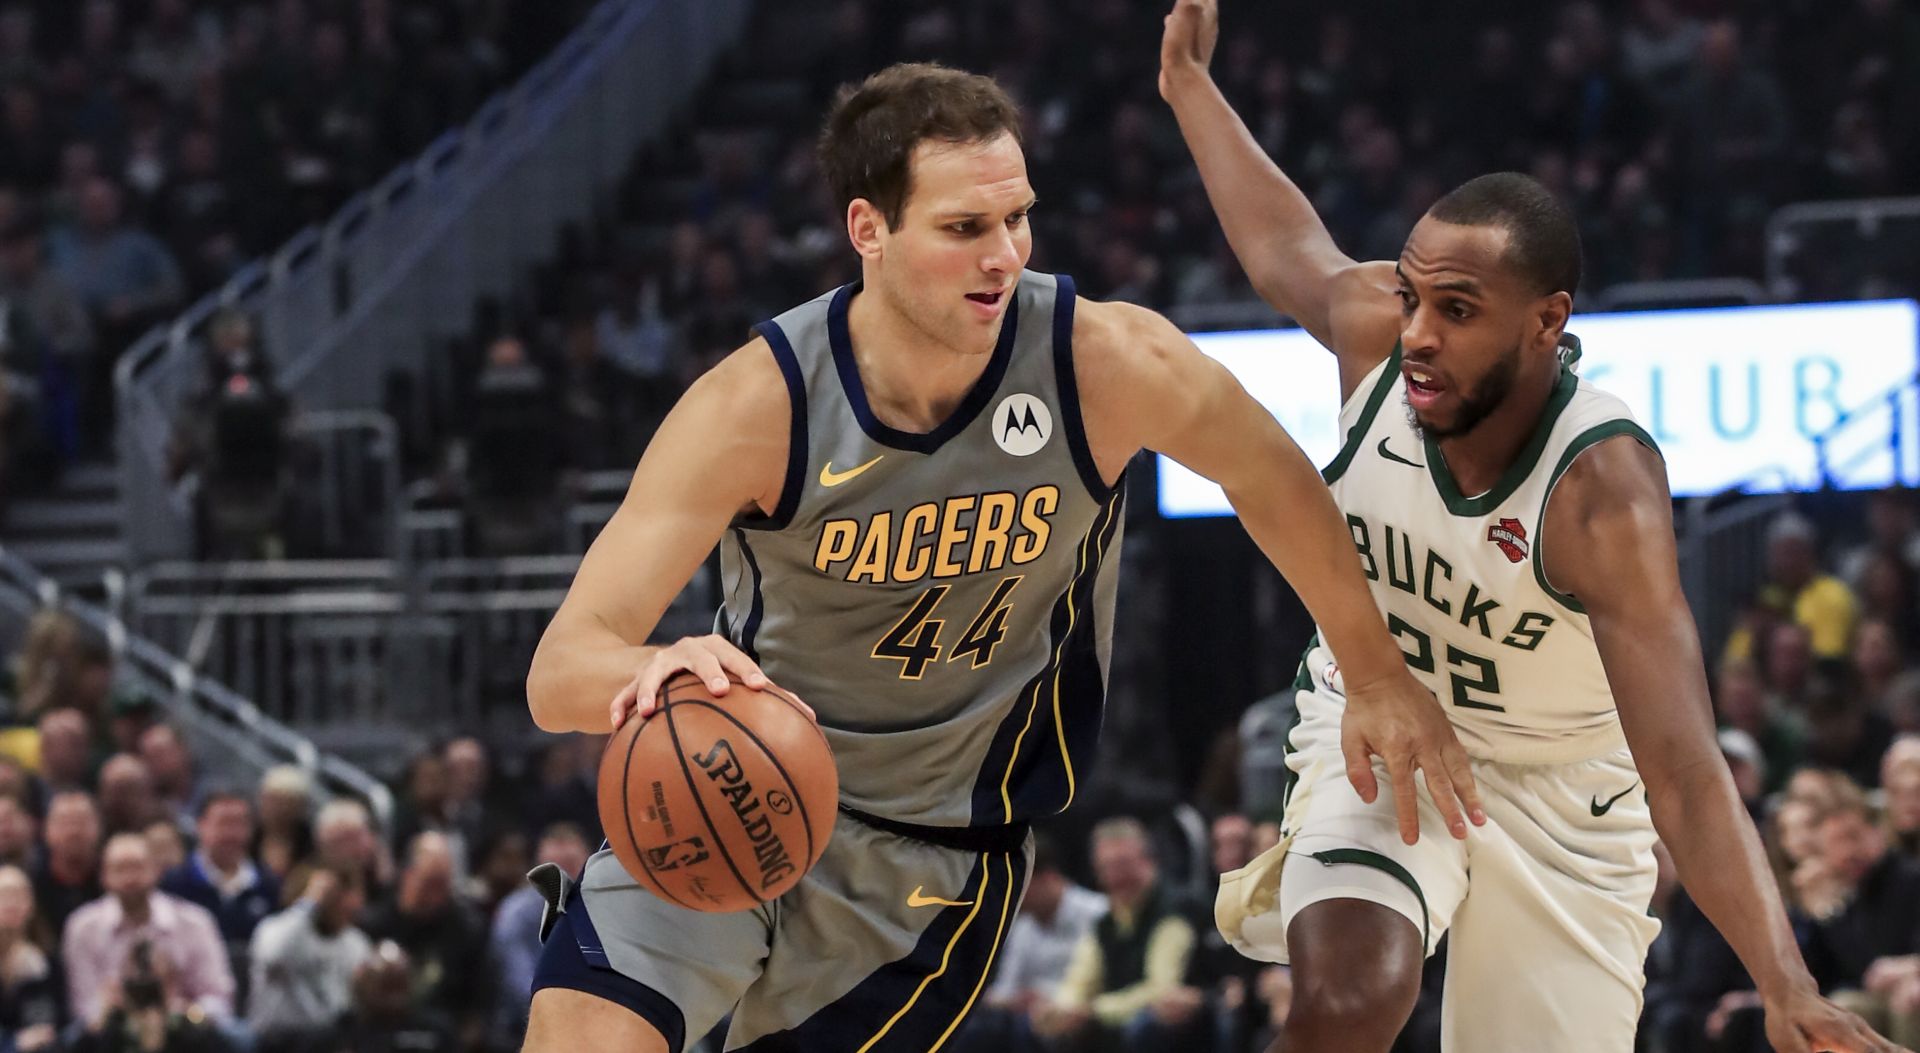 epa07421200 Indiana Pacers forward Bojan Bogdanovic of Croatia (L) drives around Milwaukee Bucks forward Khris Middleton (R) during the NBA game between the Indiana Pacers and the Milwaukee Bucks at Fiserv Forum in Milwaukee, Wisconsin, USA, 07 March 2019.  EPA/TANNEN MAURY  SHUTTERSTOCK OUT